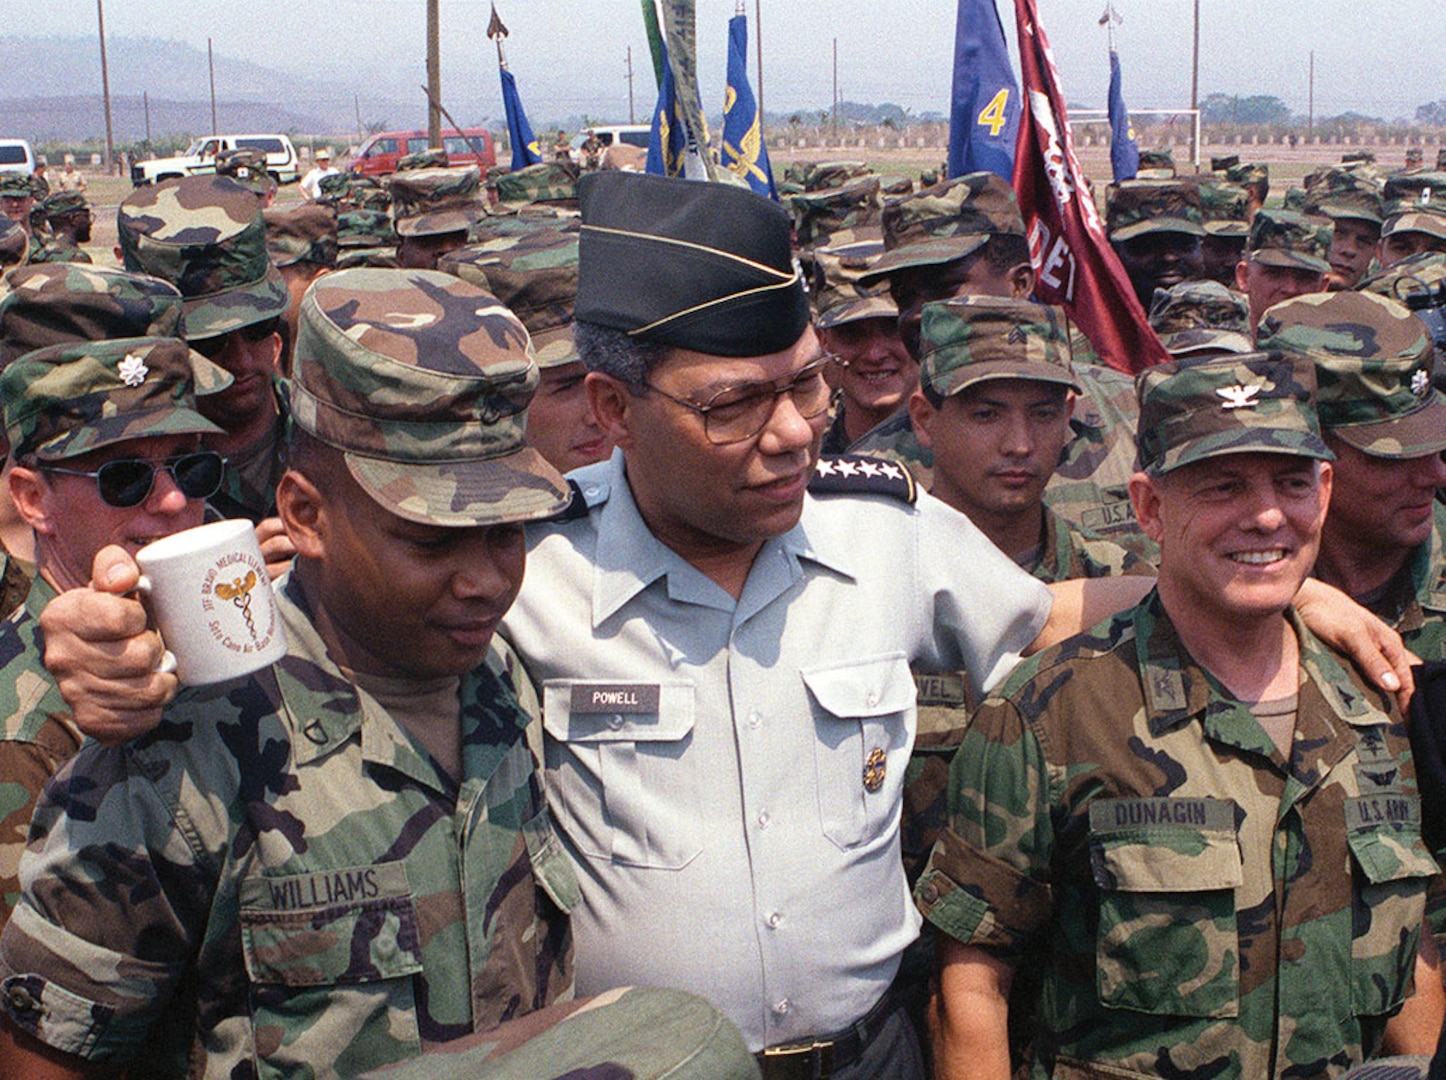 General Powell with Soldiers from Joint Task Force B during exercise Fuertes Caminos ’91, in Honduras, April 1, 1991 (DOD/National Archives and Records Administration/Pablo Tola)